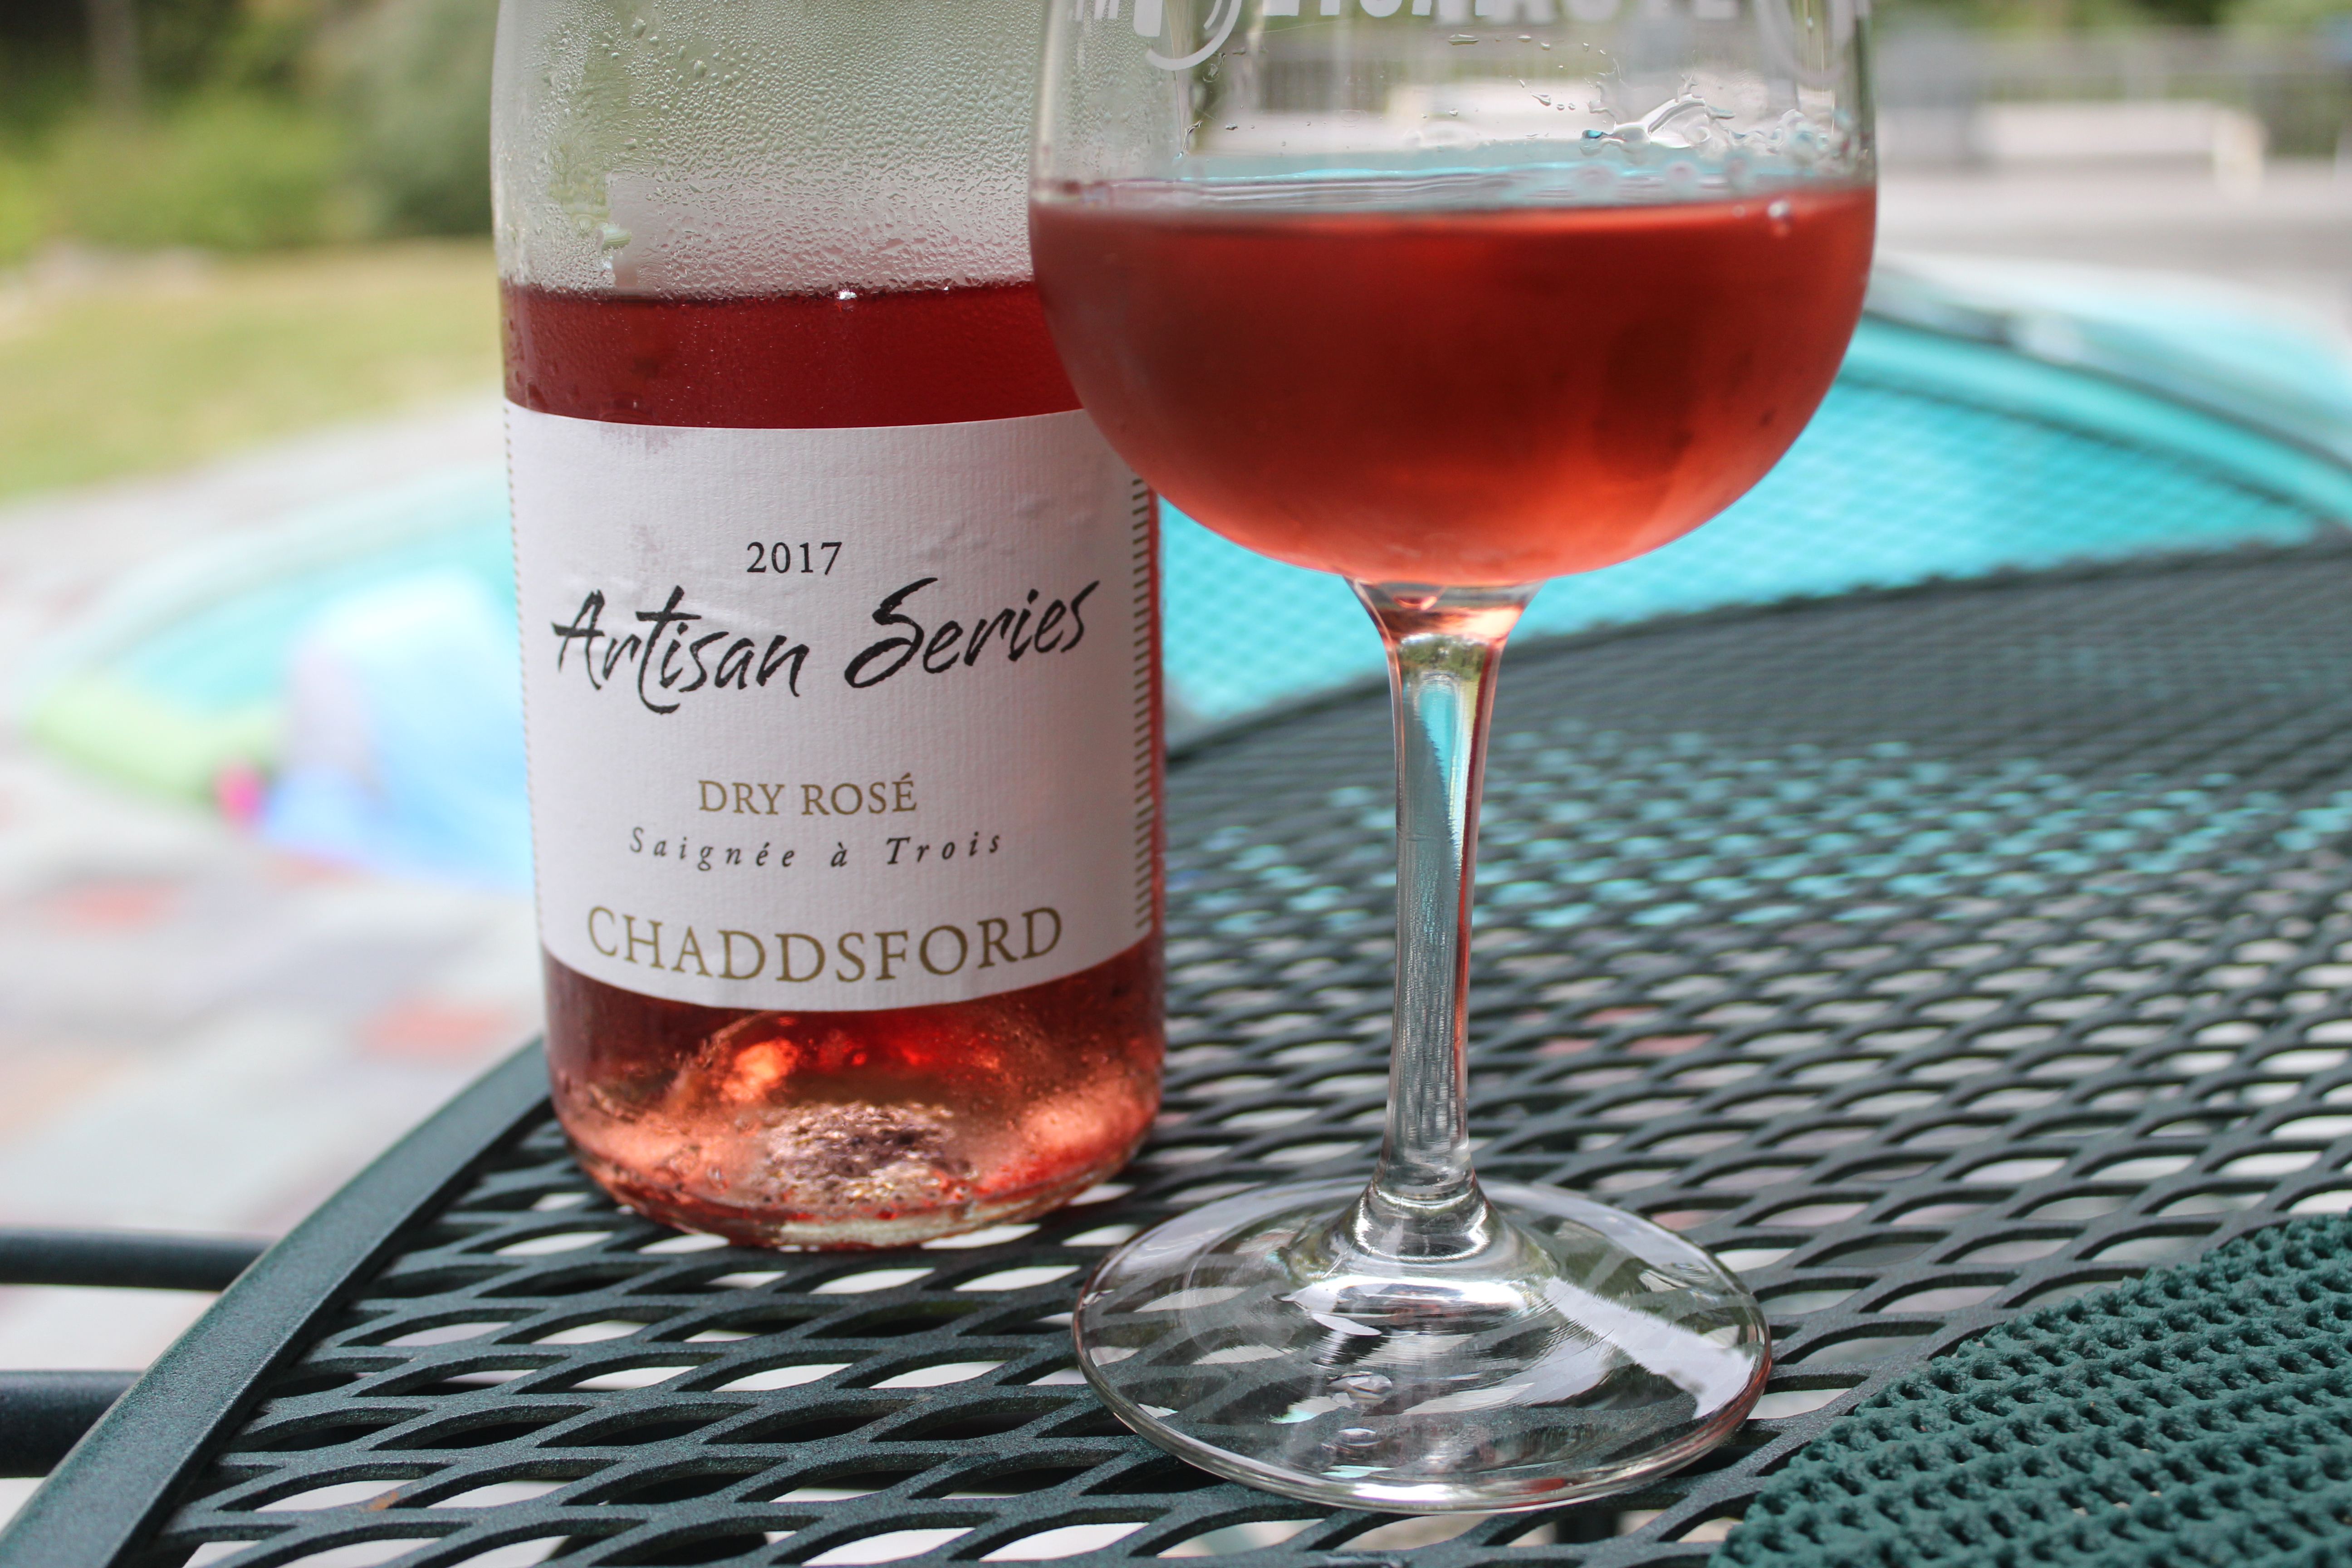 Chaddsford Winery’s Artisan Series Dry Rosé